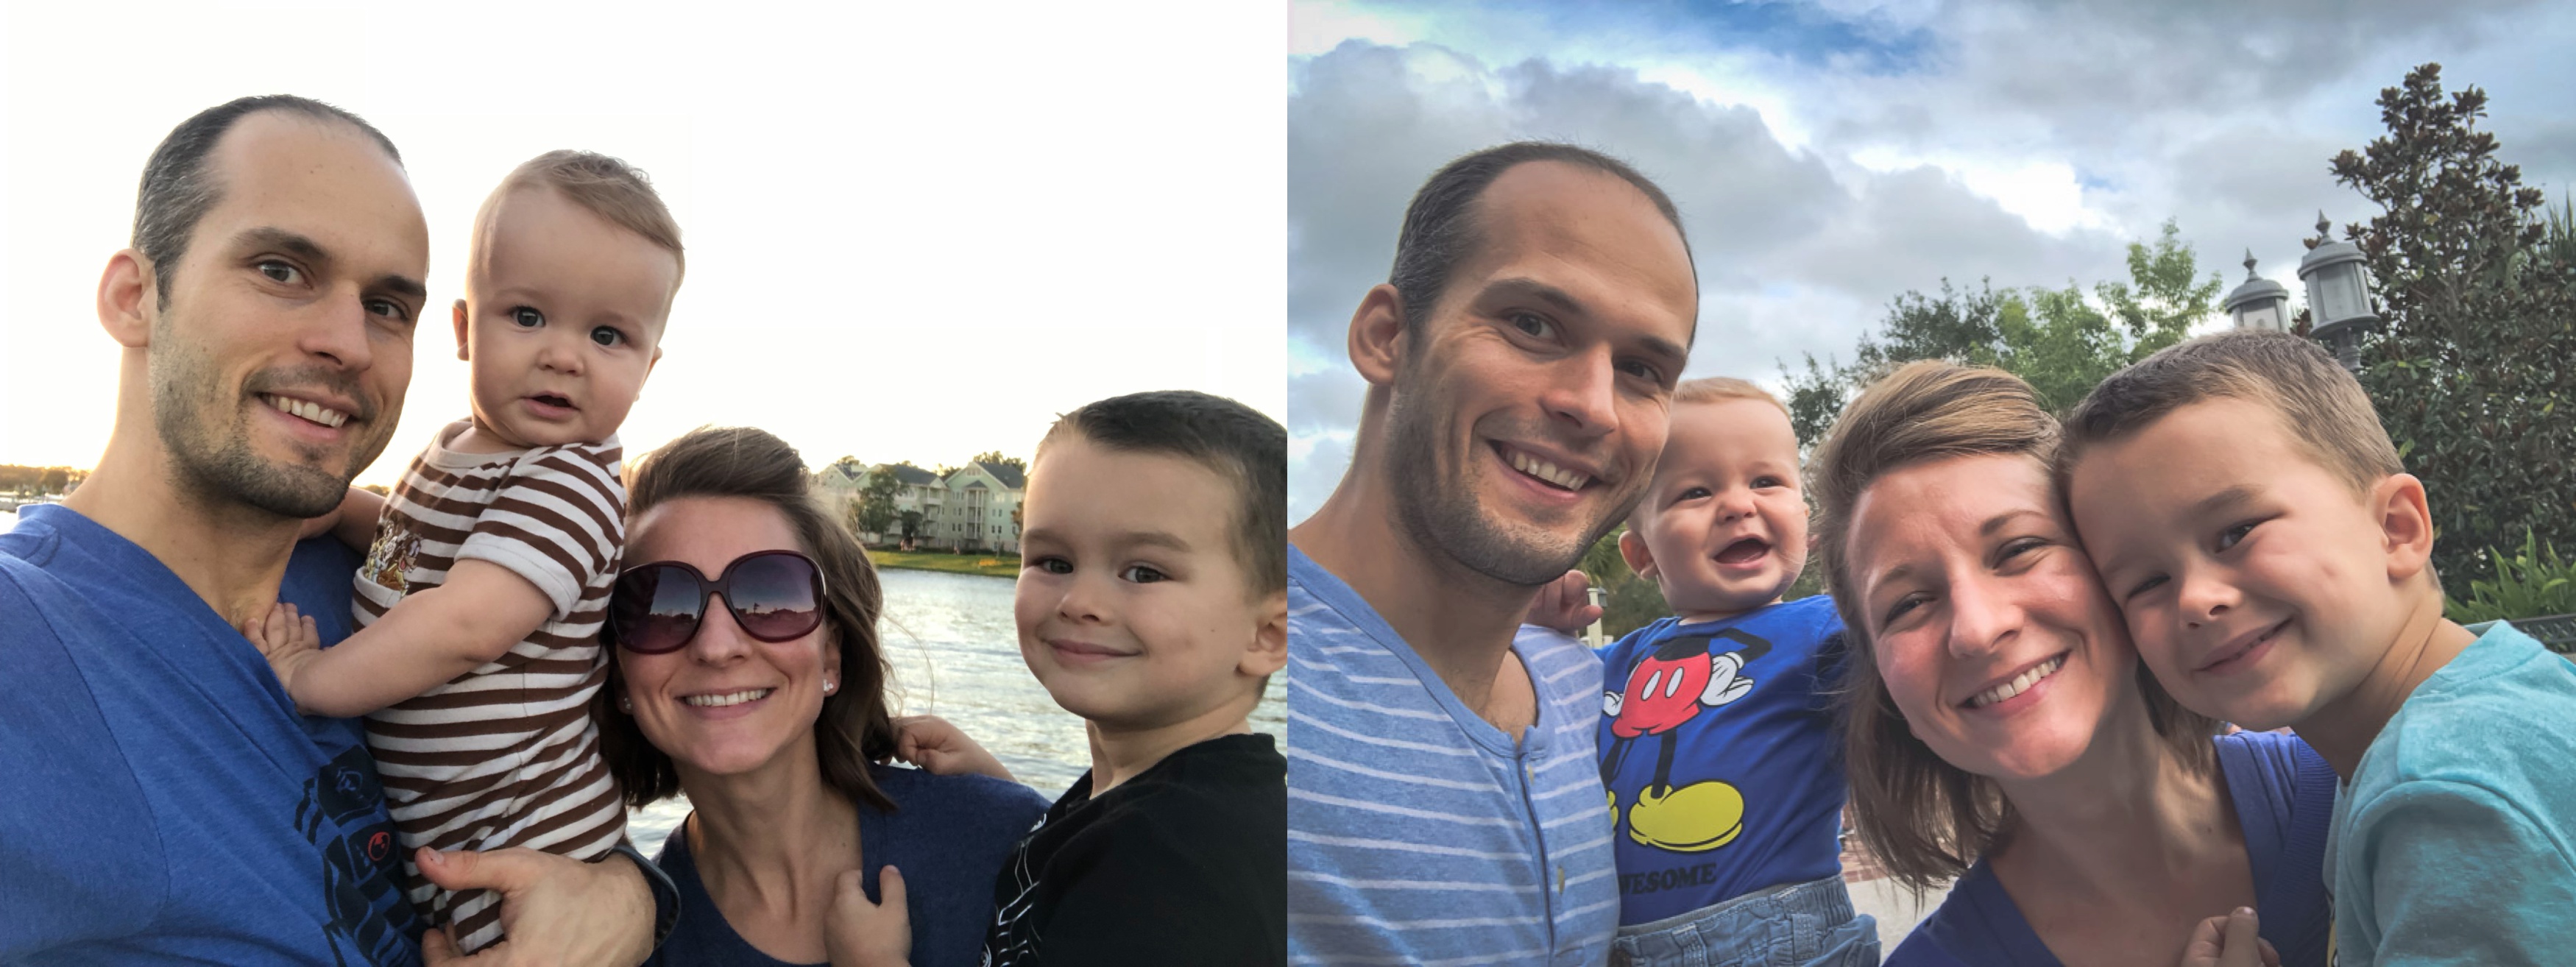 Get in Family Photos, Family Photos at Disney, Moms get in the frame, Magic for Miles